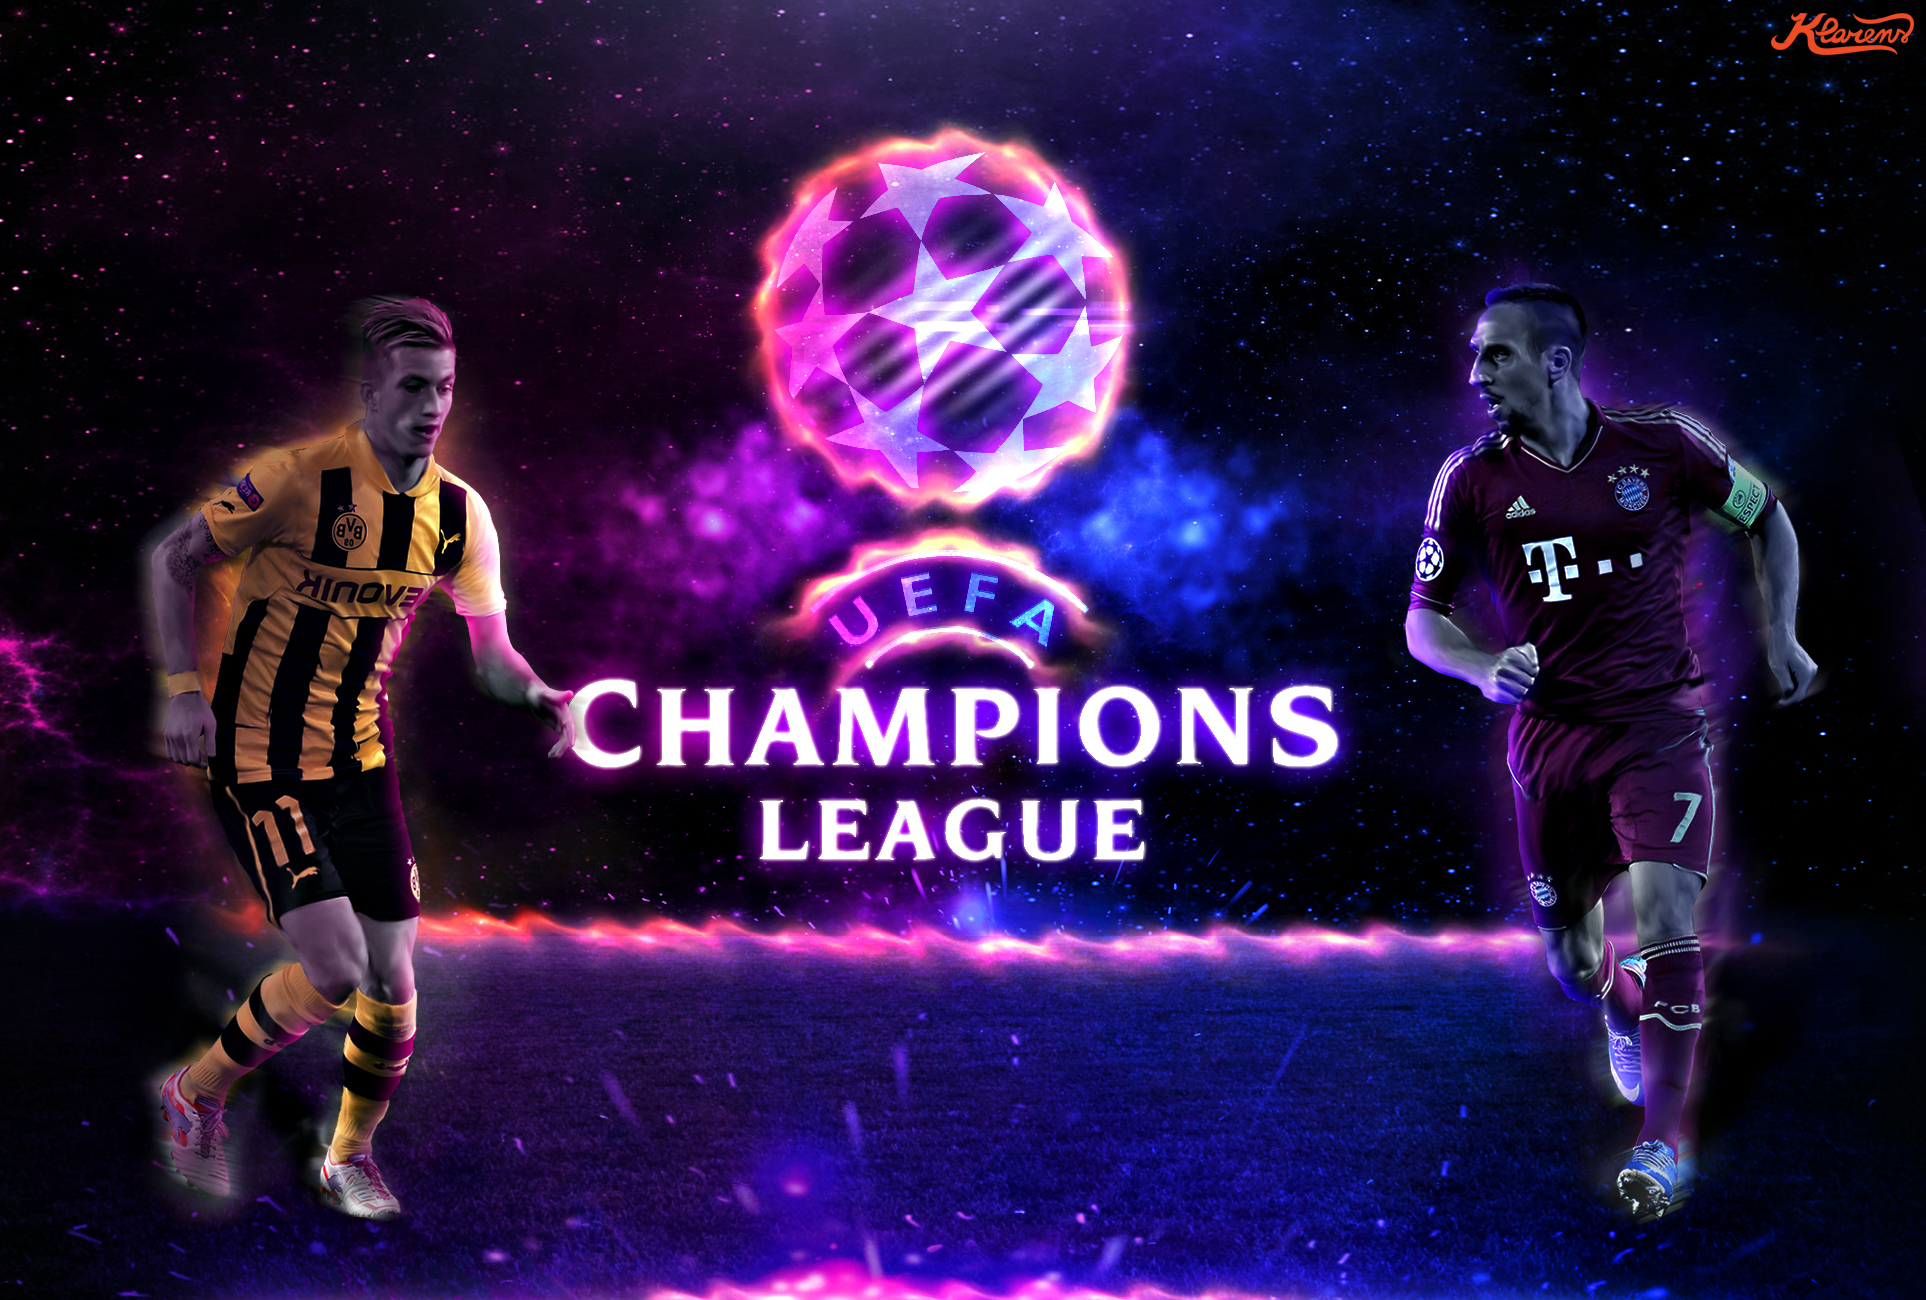 Uefa champions league FINAL by GKDes1gn on DeviantArt